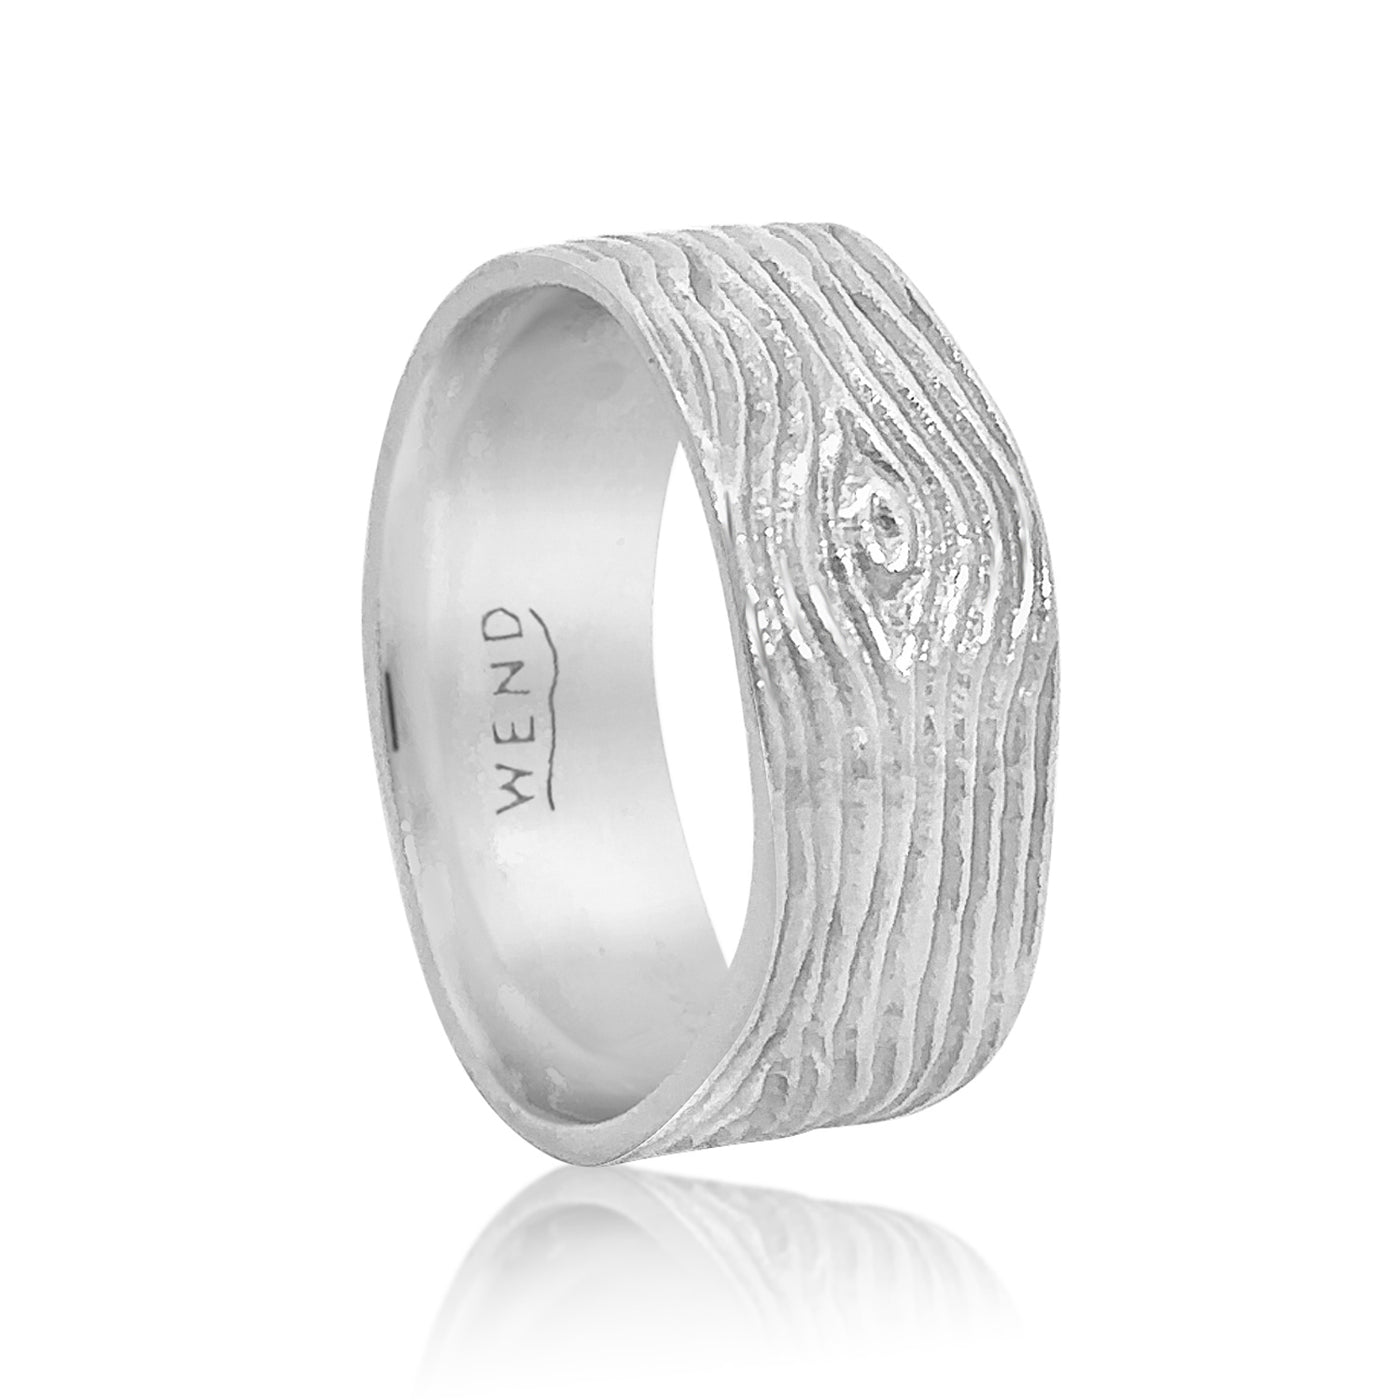 Knots White Gold Wide Band